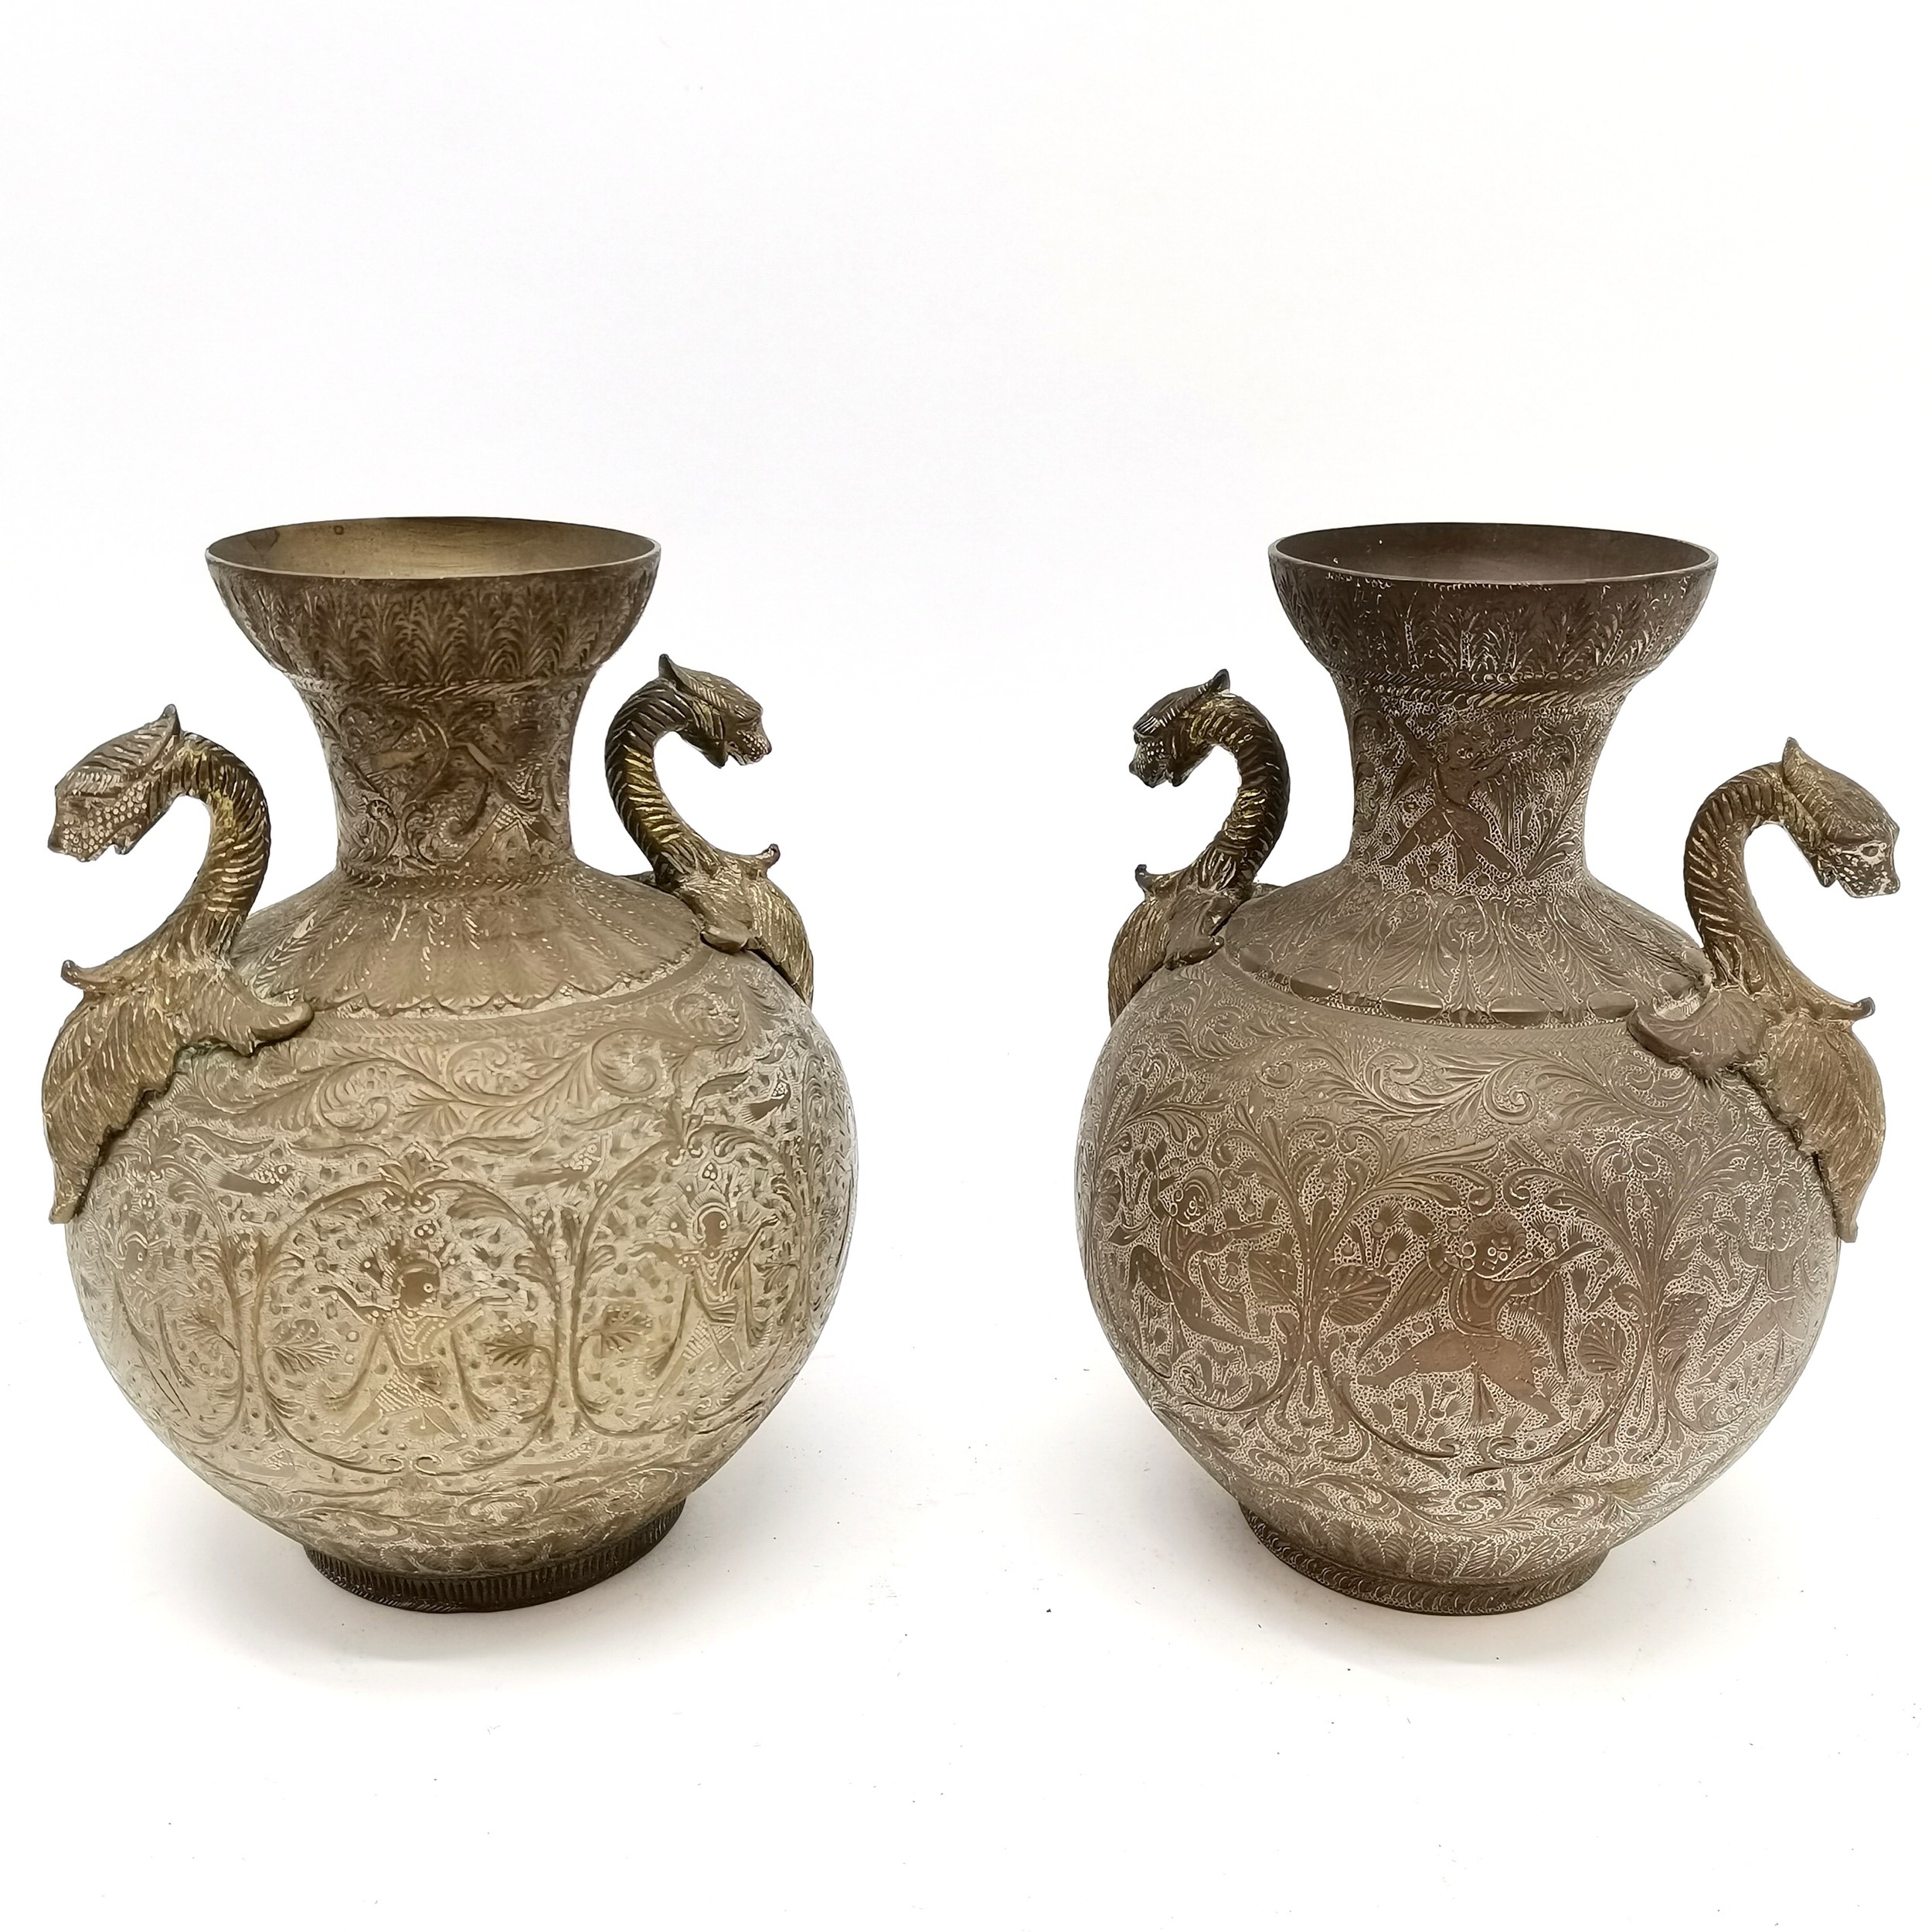 Indian pair of brass 2 handled vases - 21cm high with engraved detail of dancers to the bodies - Image 2 of 3